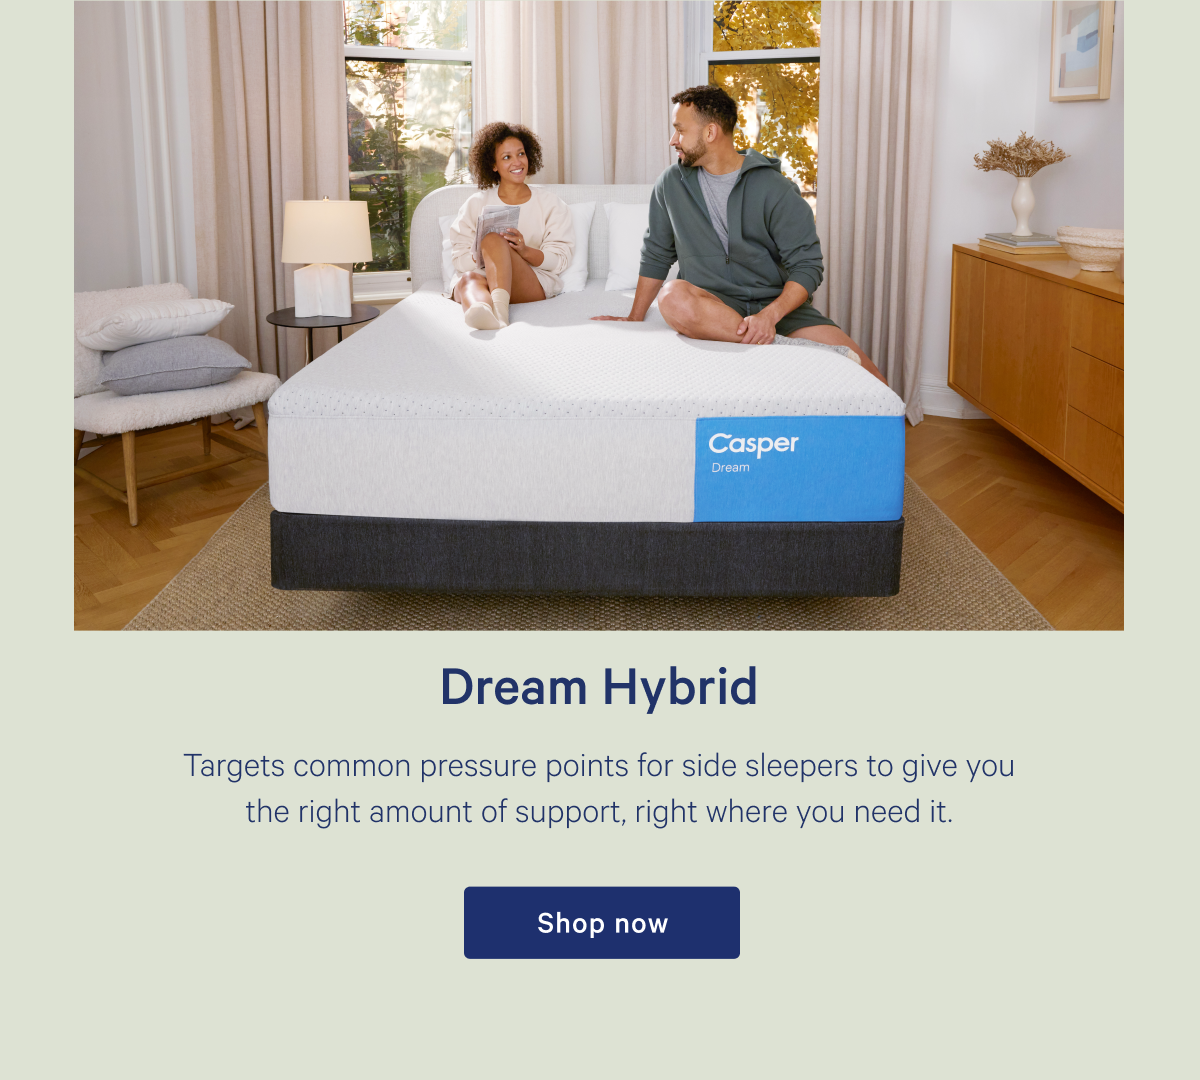 Dream Hybrid >> Targets common pressure points for side sleepers to give you the right amount of support, right where you need it. >> Shop now >>